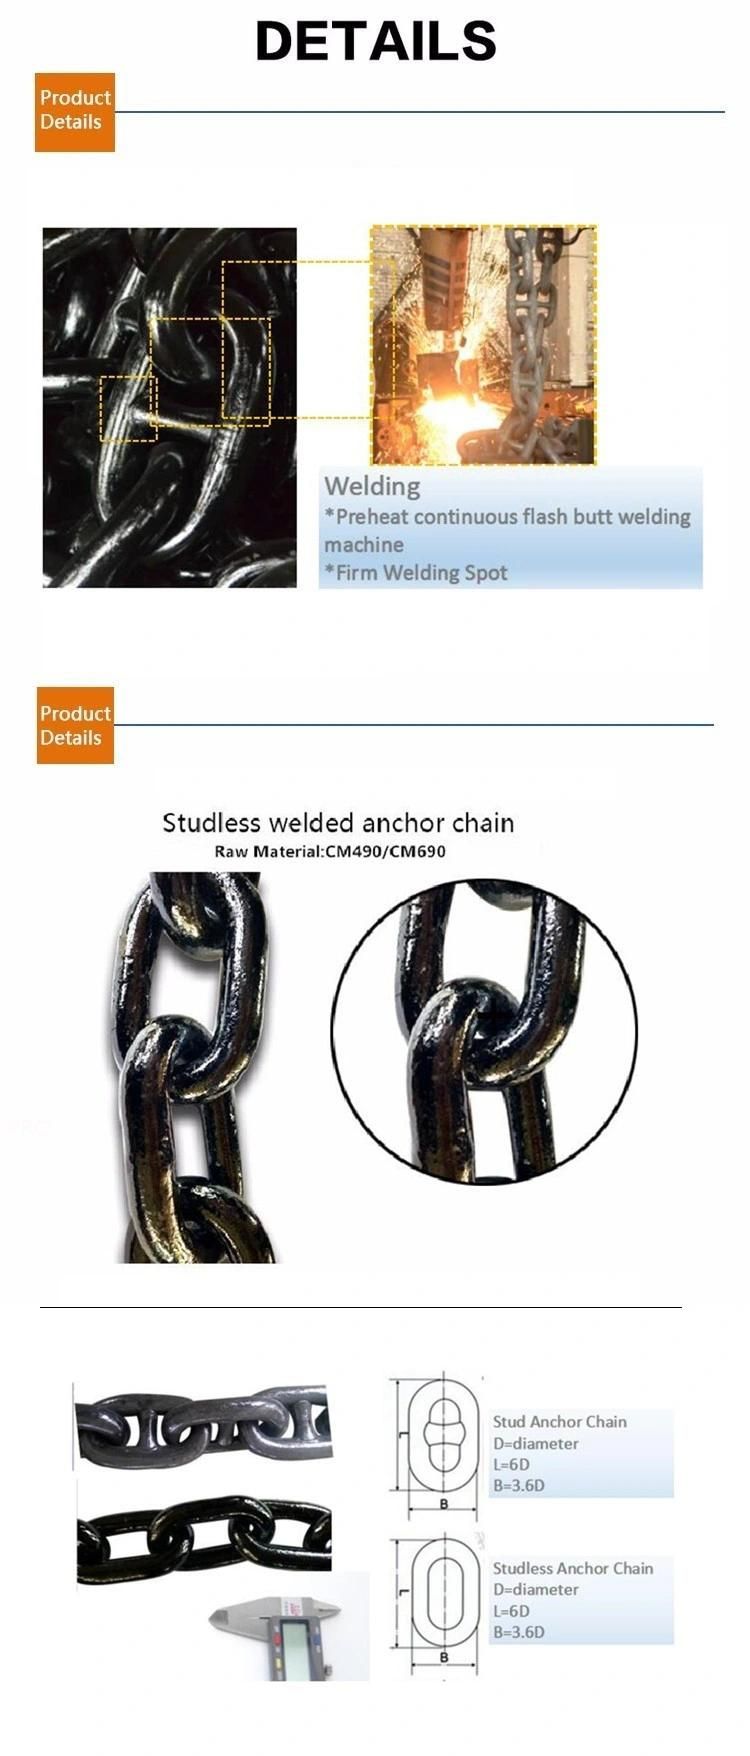 Parts of Studless Anchor Chain for Ship